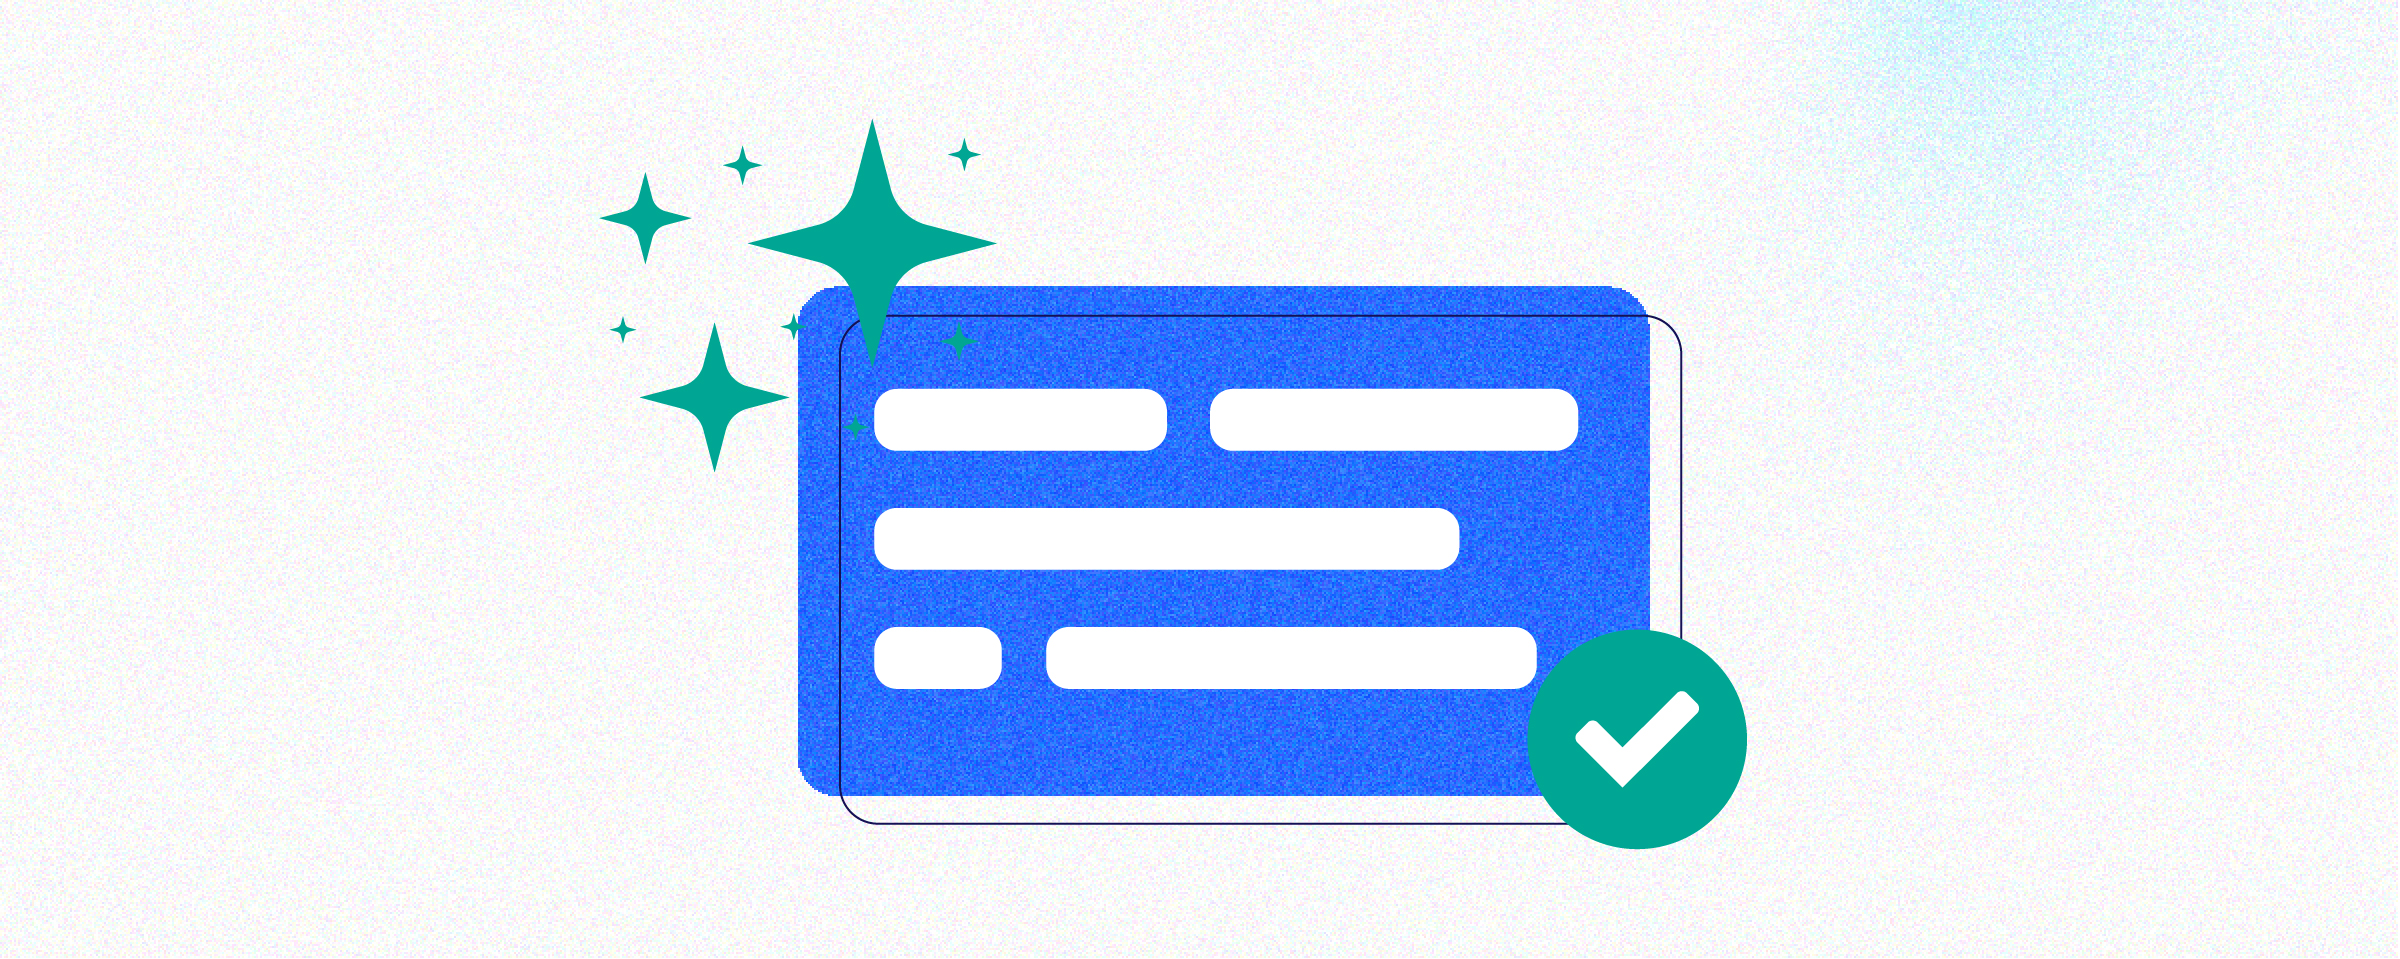 Icon depicting a website with sparkles and a green check mark next to it